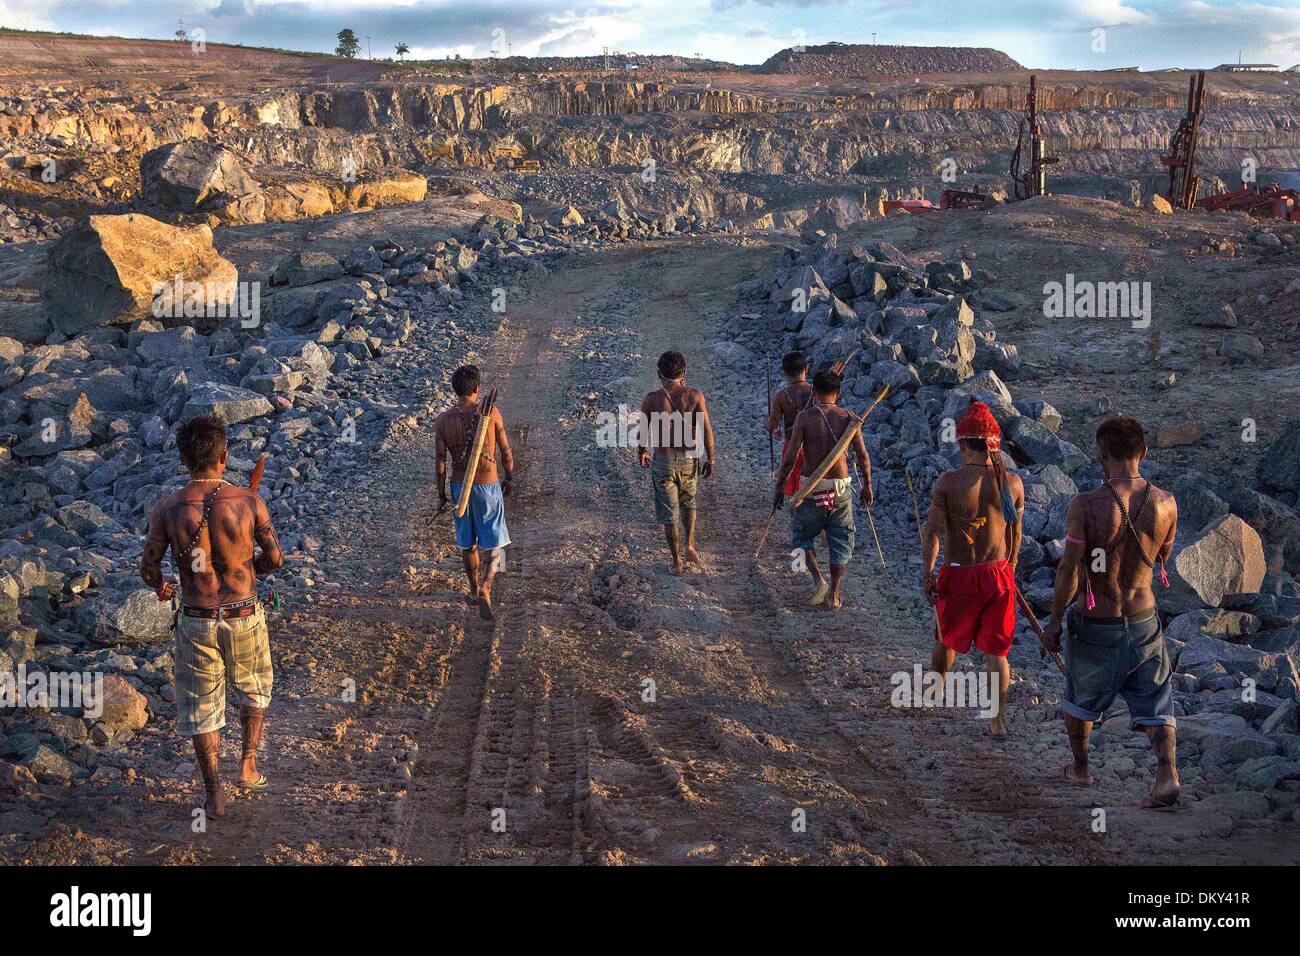 Belo Monte, Para, Brazil. 27th May, 2013. Indigenous Munduruku men survey the quarry site for the Belo Monte Dam. On May 27th, an indigenous group made up predominantly of Munduruku occupied the dam and halted construction on the main turbine site. The indigenous Xikrin people live on the Bacaja, a tributary of the Xingu River, where construction of the Belo Monte Dam is reaching peak construction. Some scientists warn that the water level of the Bacaja will decrease precipitously due to the dam thus effecting agriculture for survival. (Credit Image: © Taylor Weidman/ZUMA Press) Stock Photo